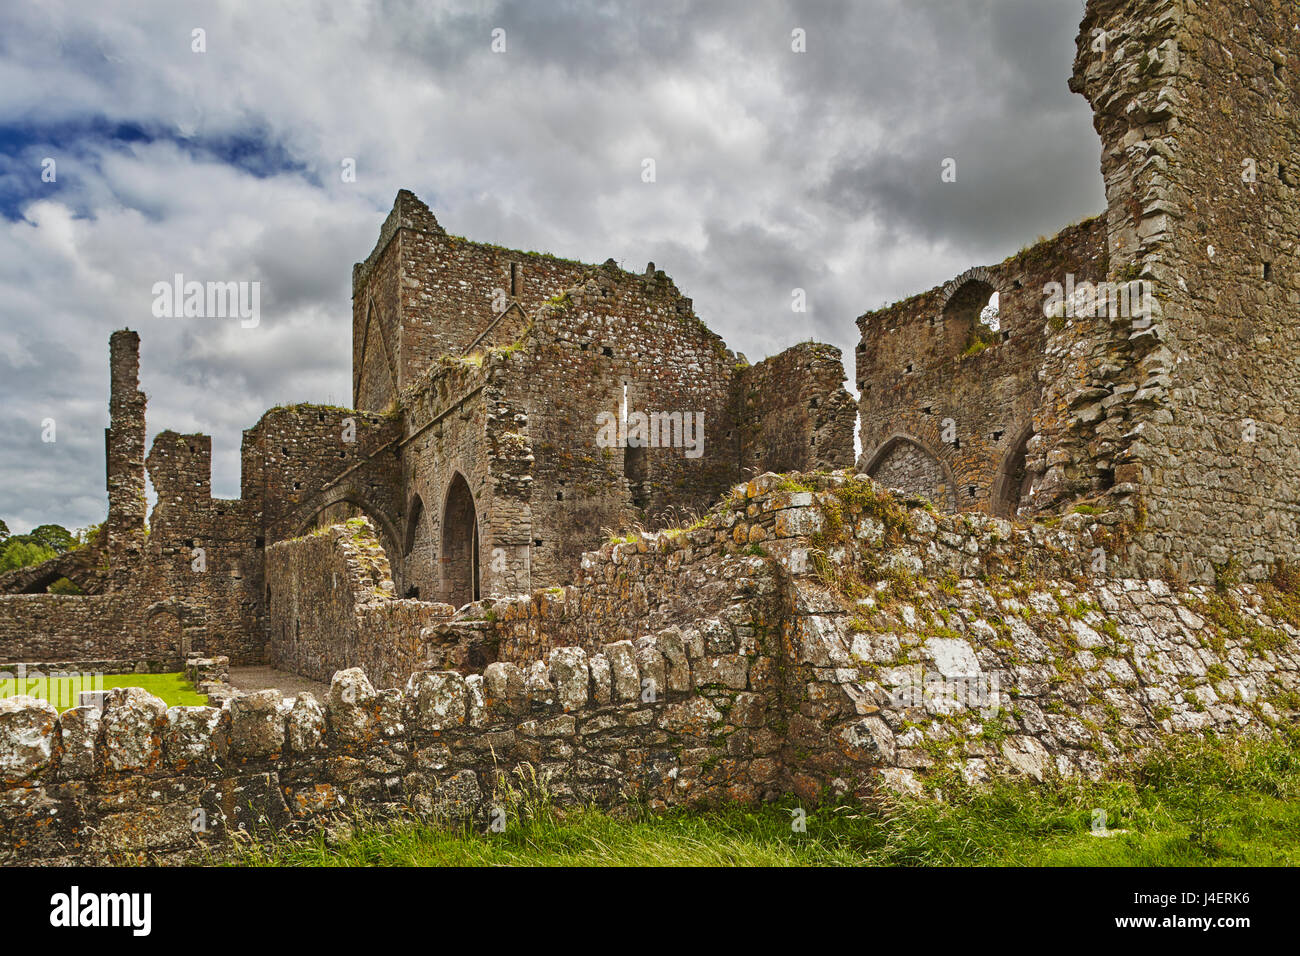 The ruins of Hore Abbey, near the ruins of the Rock of Cashel, Cashel, County Tipperary, Munster, Republic of Ireland, Europe Stock Photo